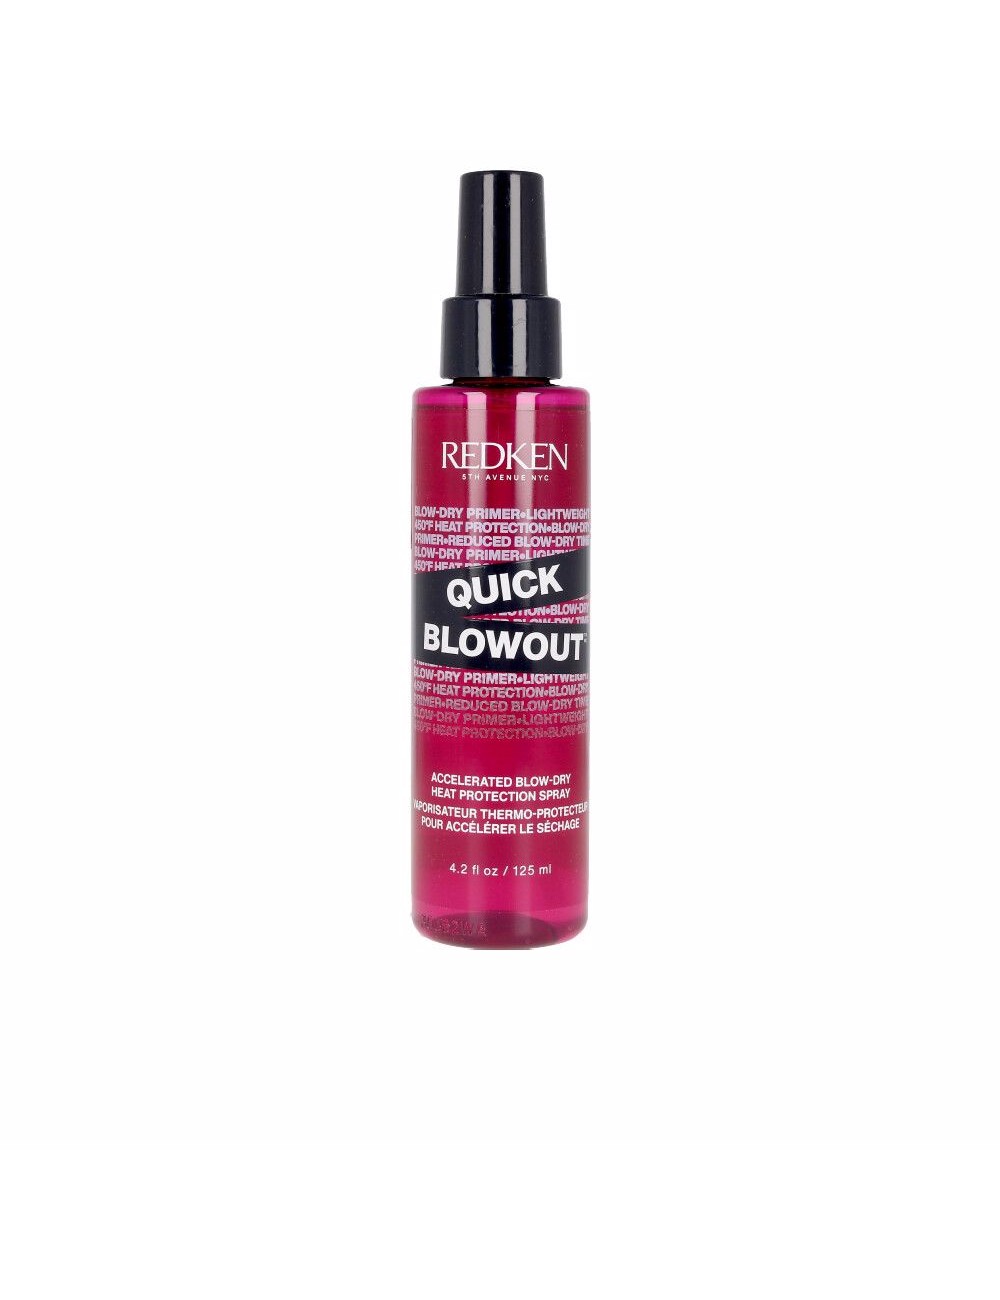 QUICK BLOWOUT hair protecting spray 125 ml